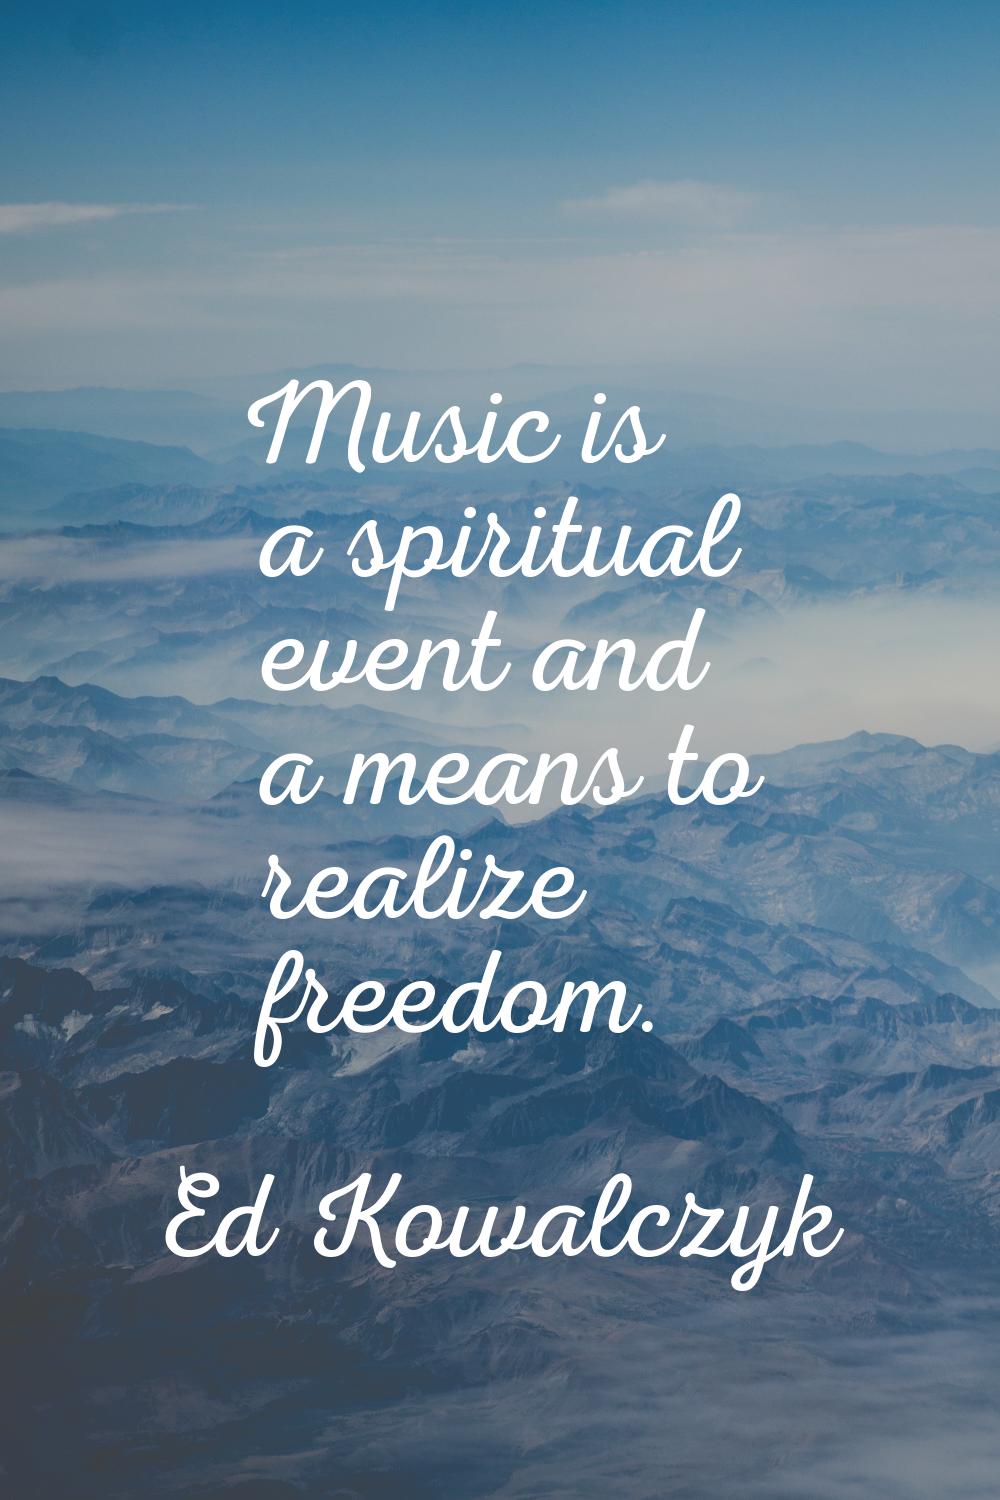 Music is a spiritual event and a means to realize freedom.